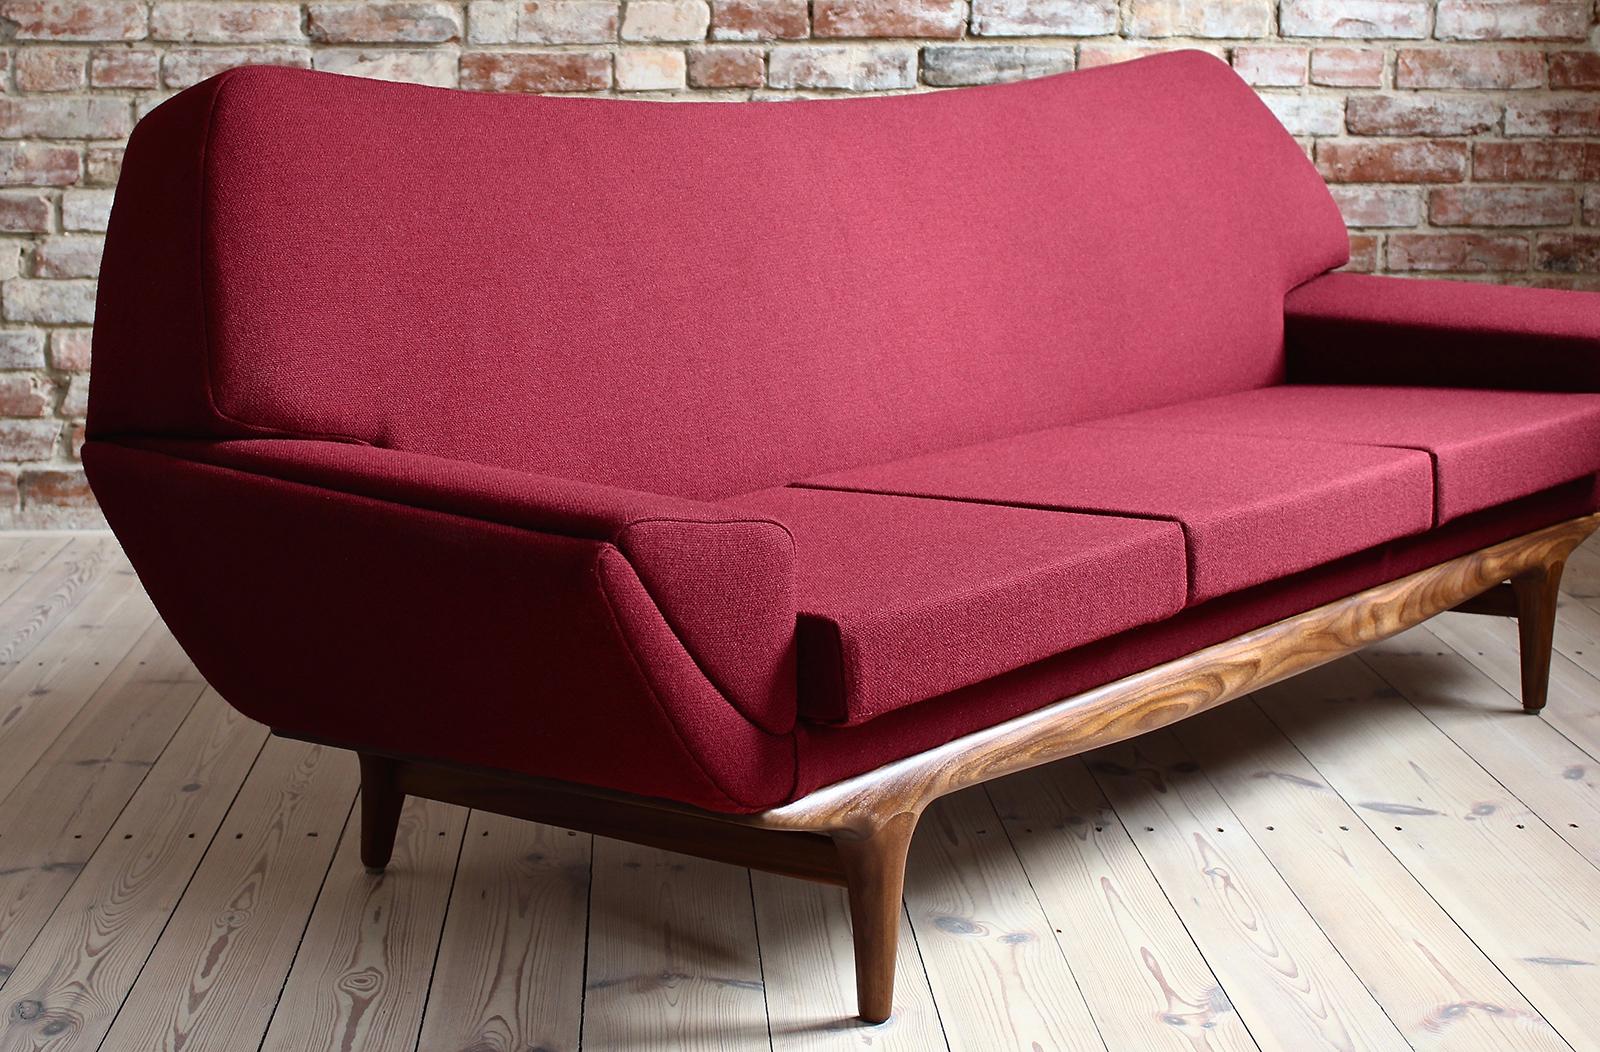 Swedish Johannes Andersen Sofa for AB Trensums reupholstered in Kvadrat Fabric, 1950s